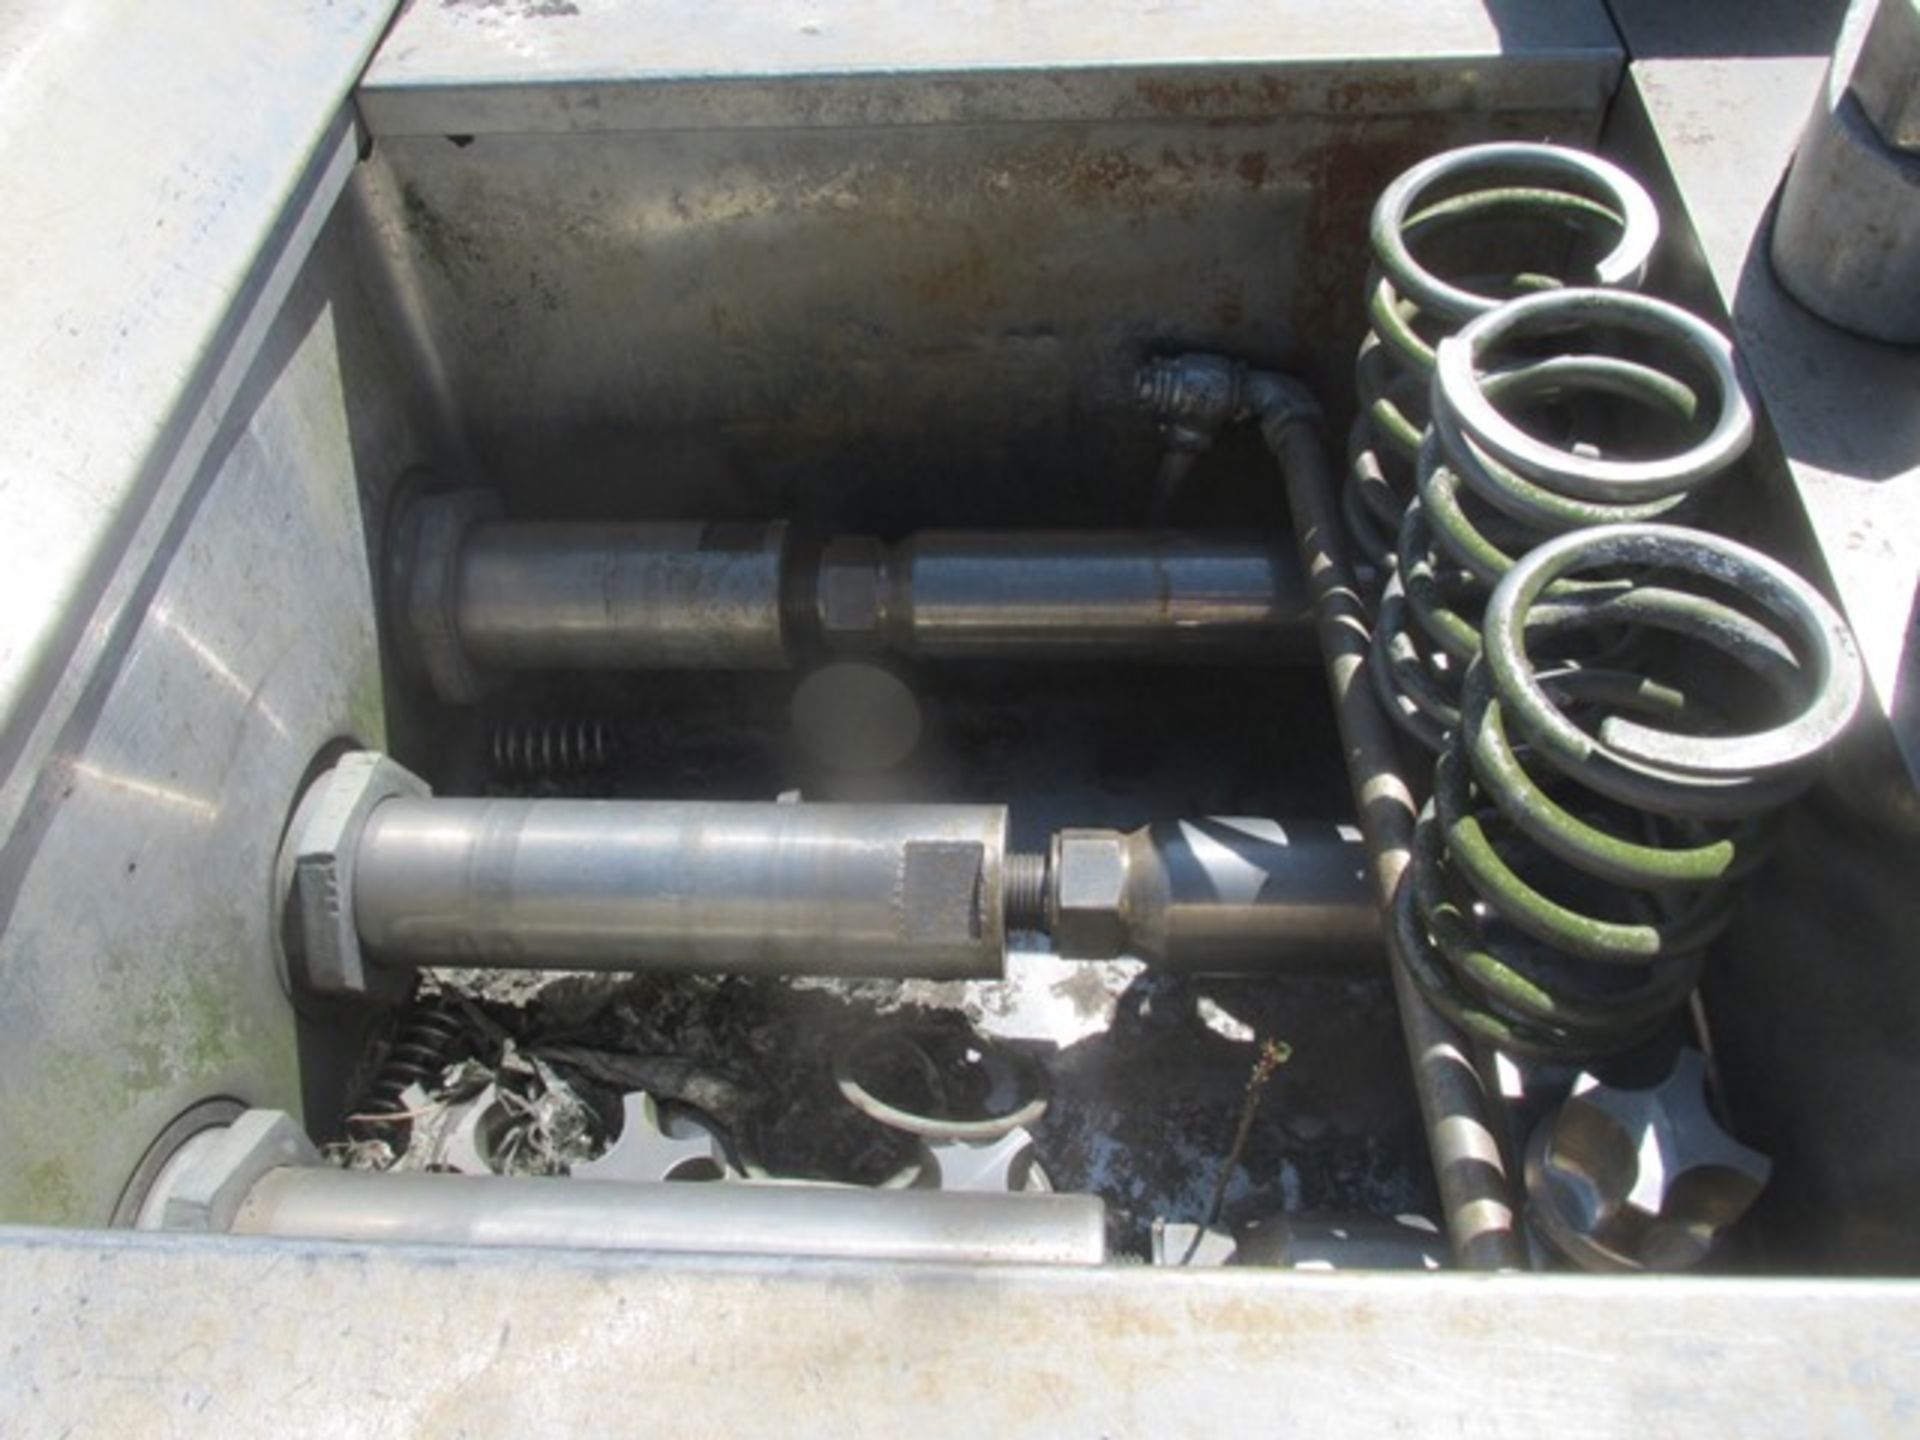 100 HP Gaulin homogenizer, stainless steel product contact surfaces, three piston design - Image 3 of 6